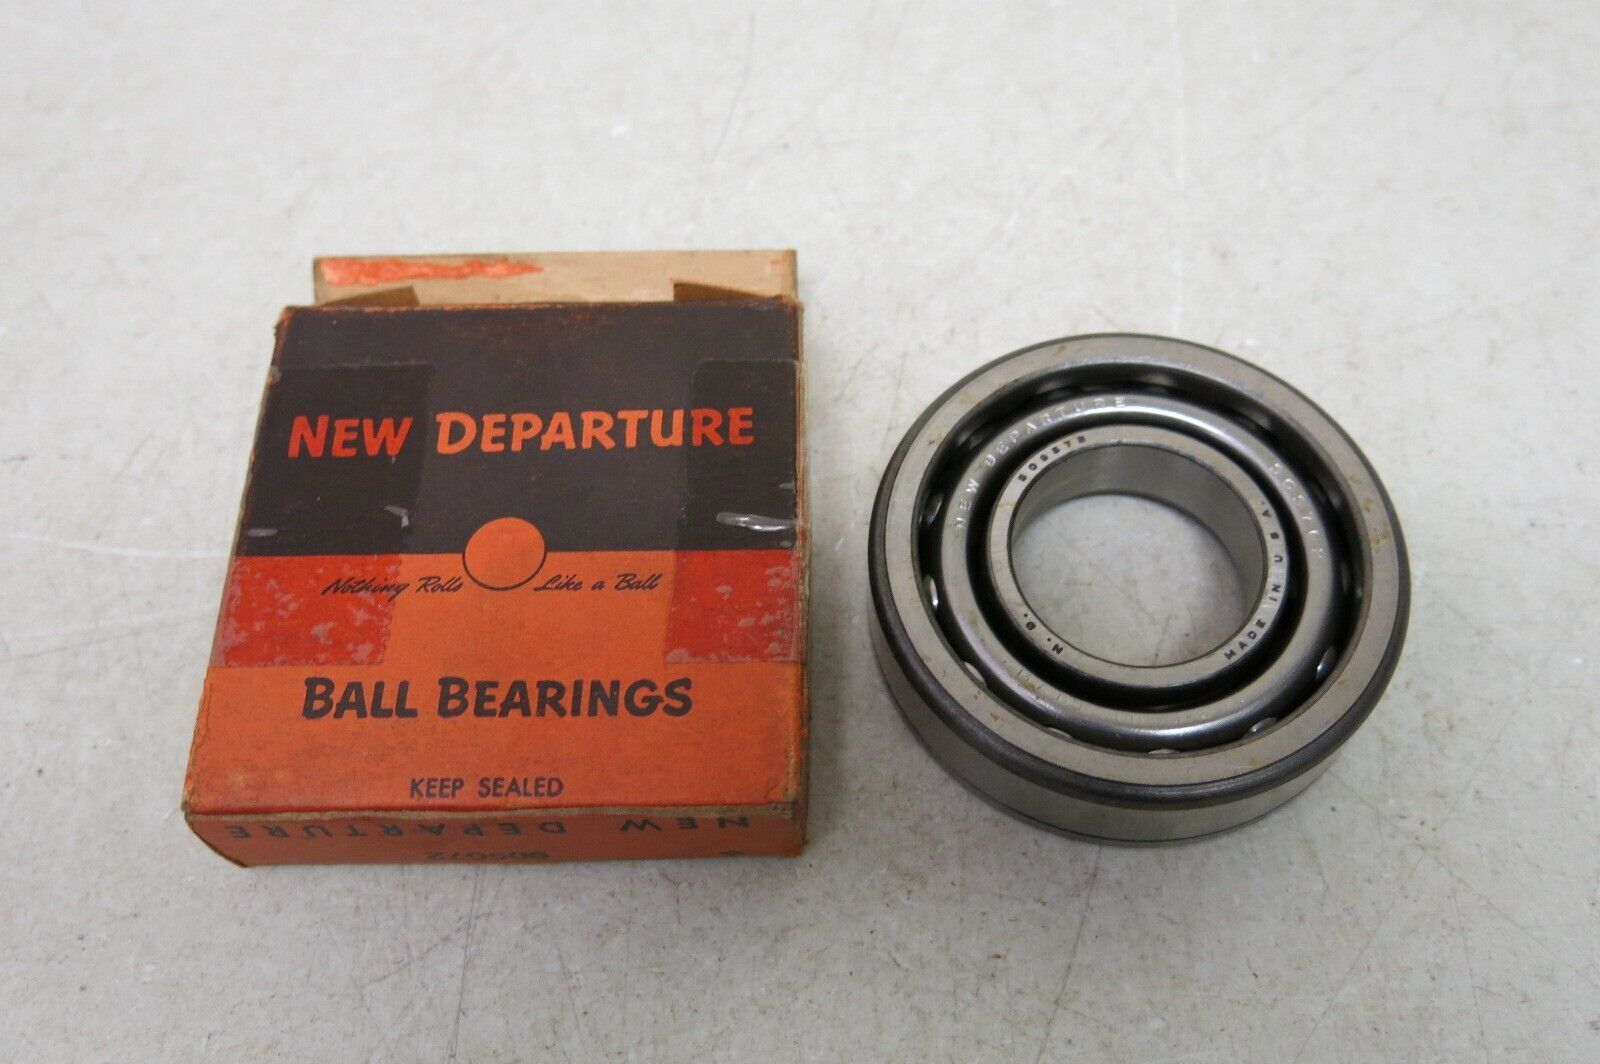 Vintage New Departure 909072 Ball Bearing 909762 for 1947-1962 Buick Cadillac